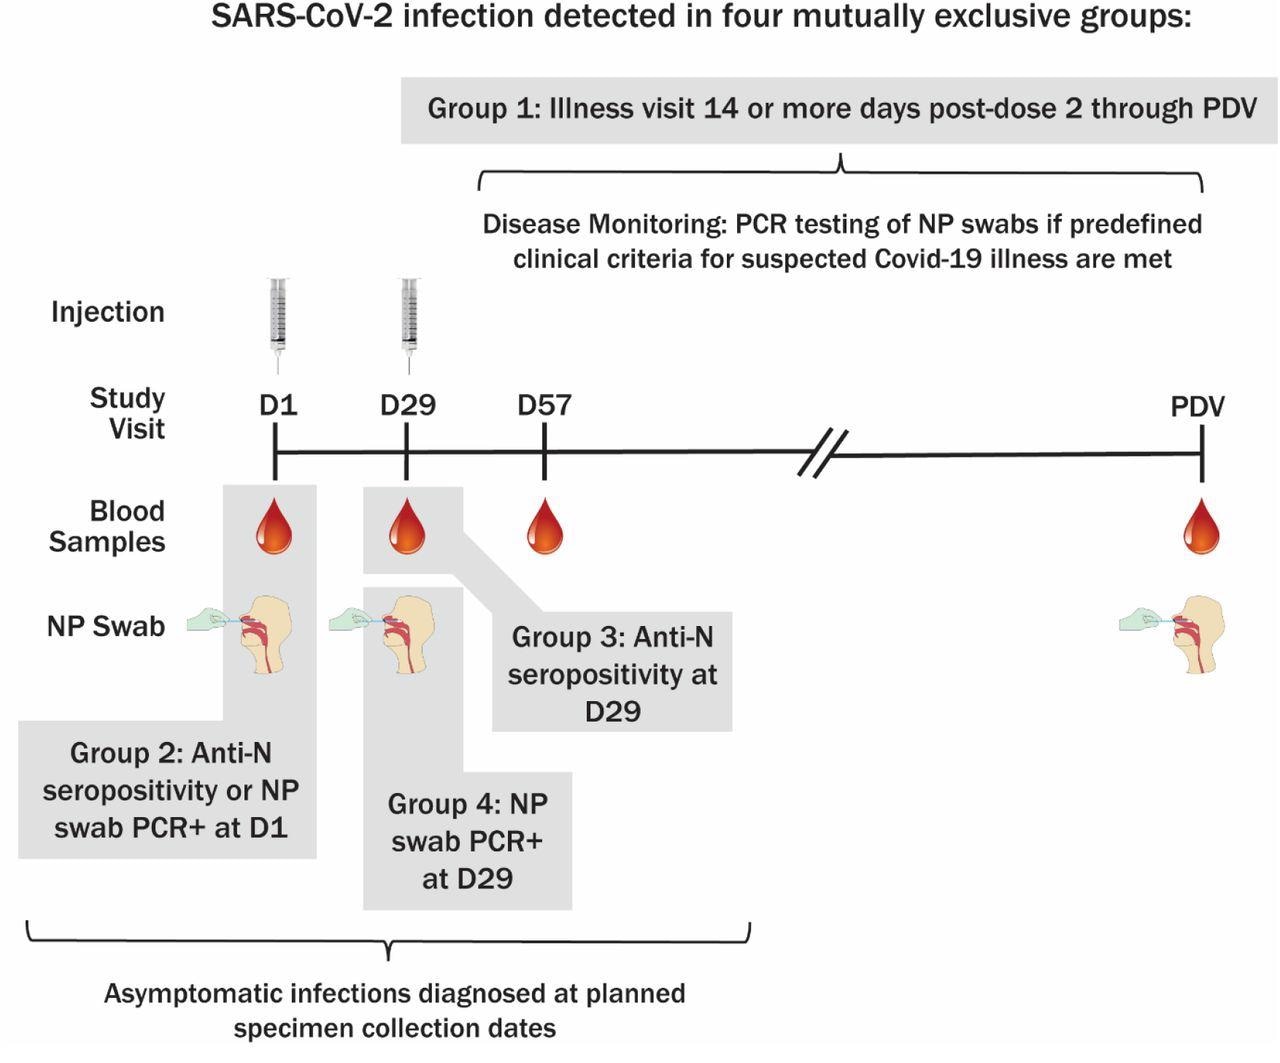 Method of SARS-CoV-2 infection determination and sampling schedule. PDV, participant decision visit.